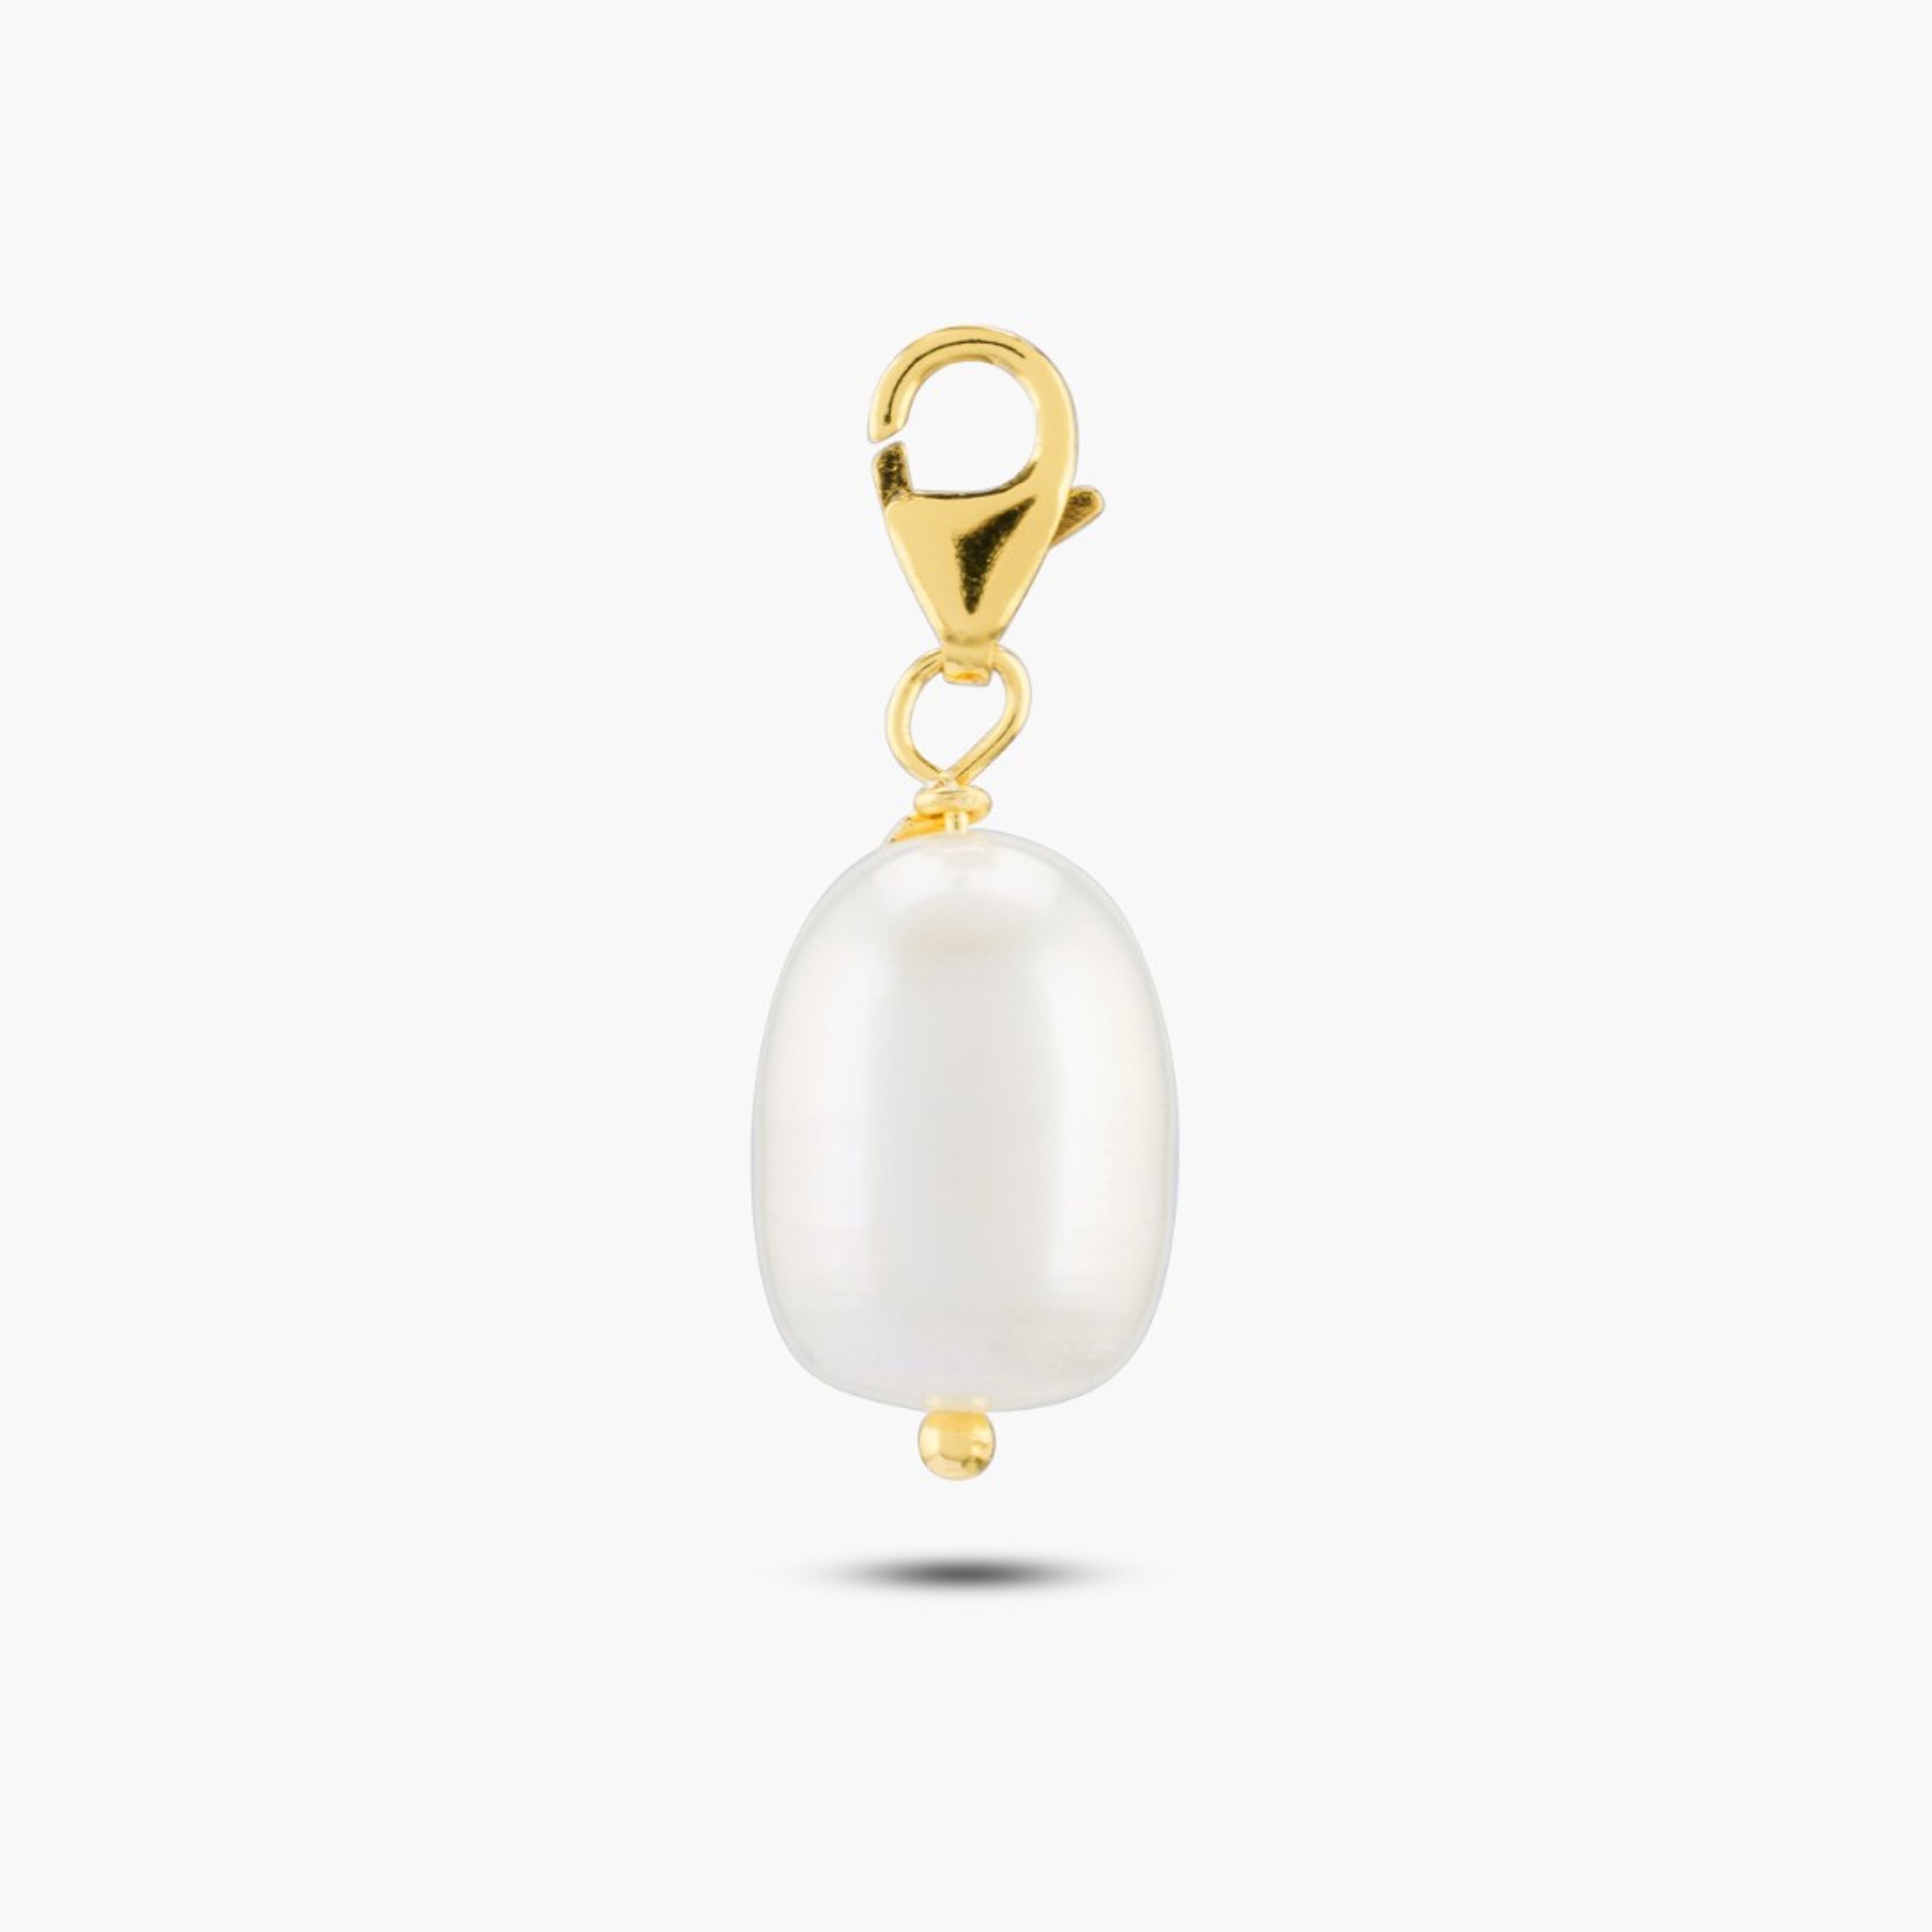 White Pearl Charm, 14K Gold Filled Crystal Pearl Charm, 5mm Pearl Hooplet,  Gold Ball Charm, Gold Earring Charms, Gold Charms, KL20-1024 